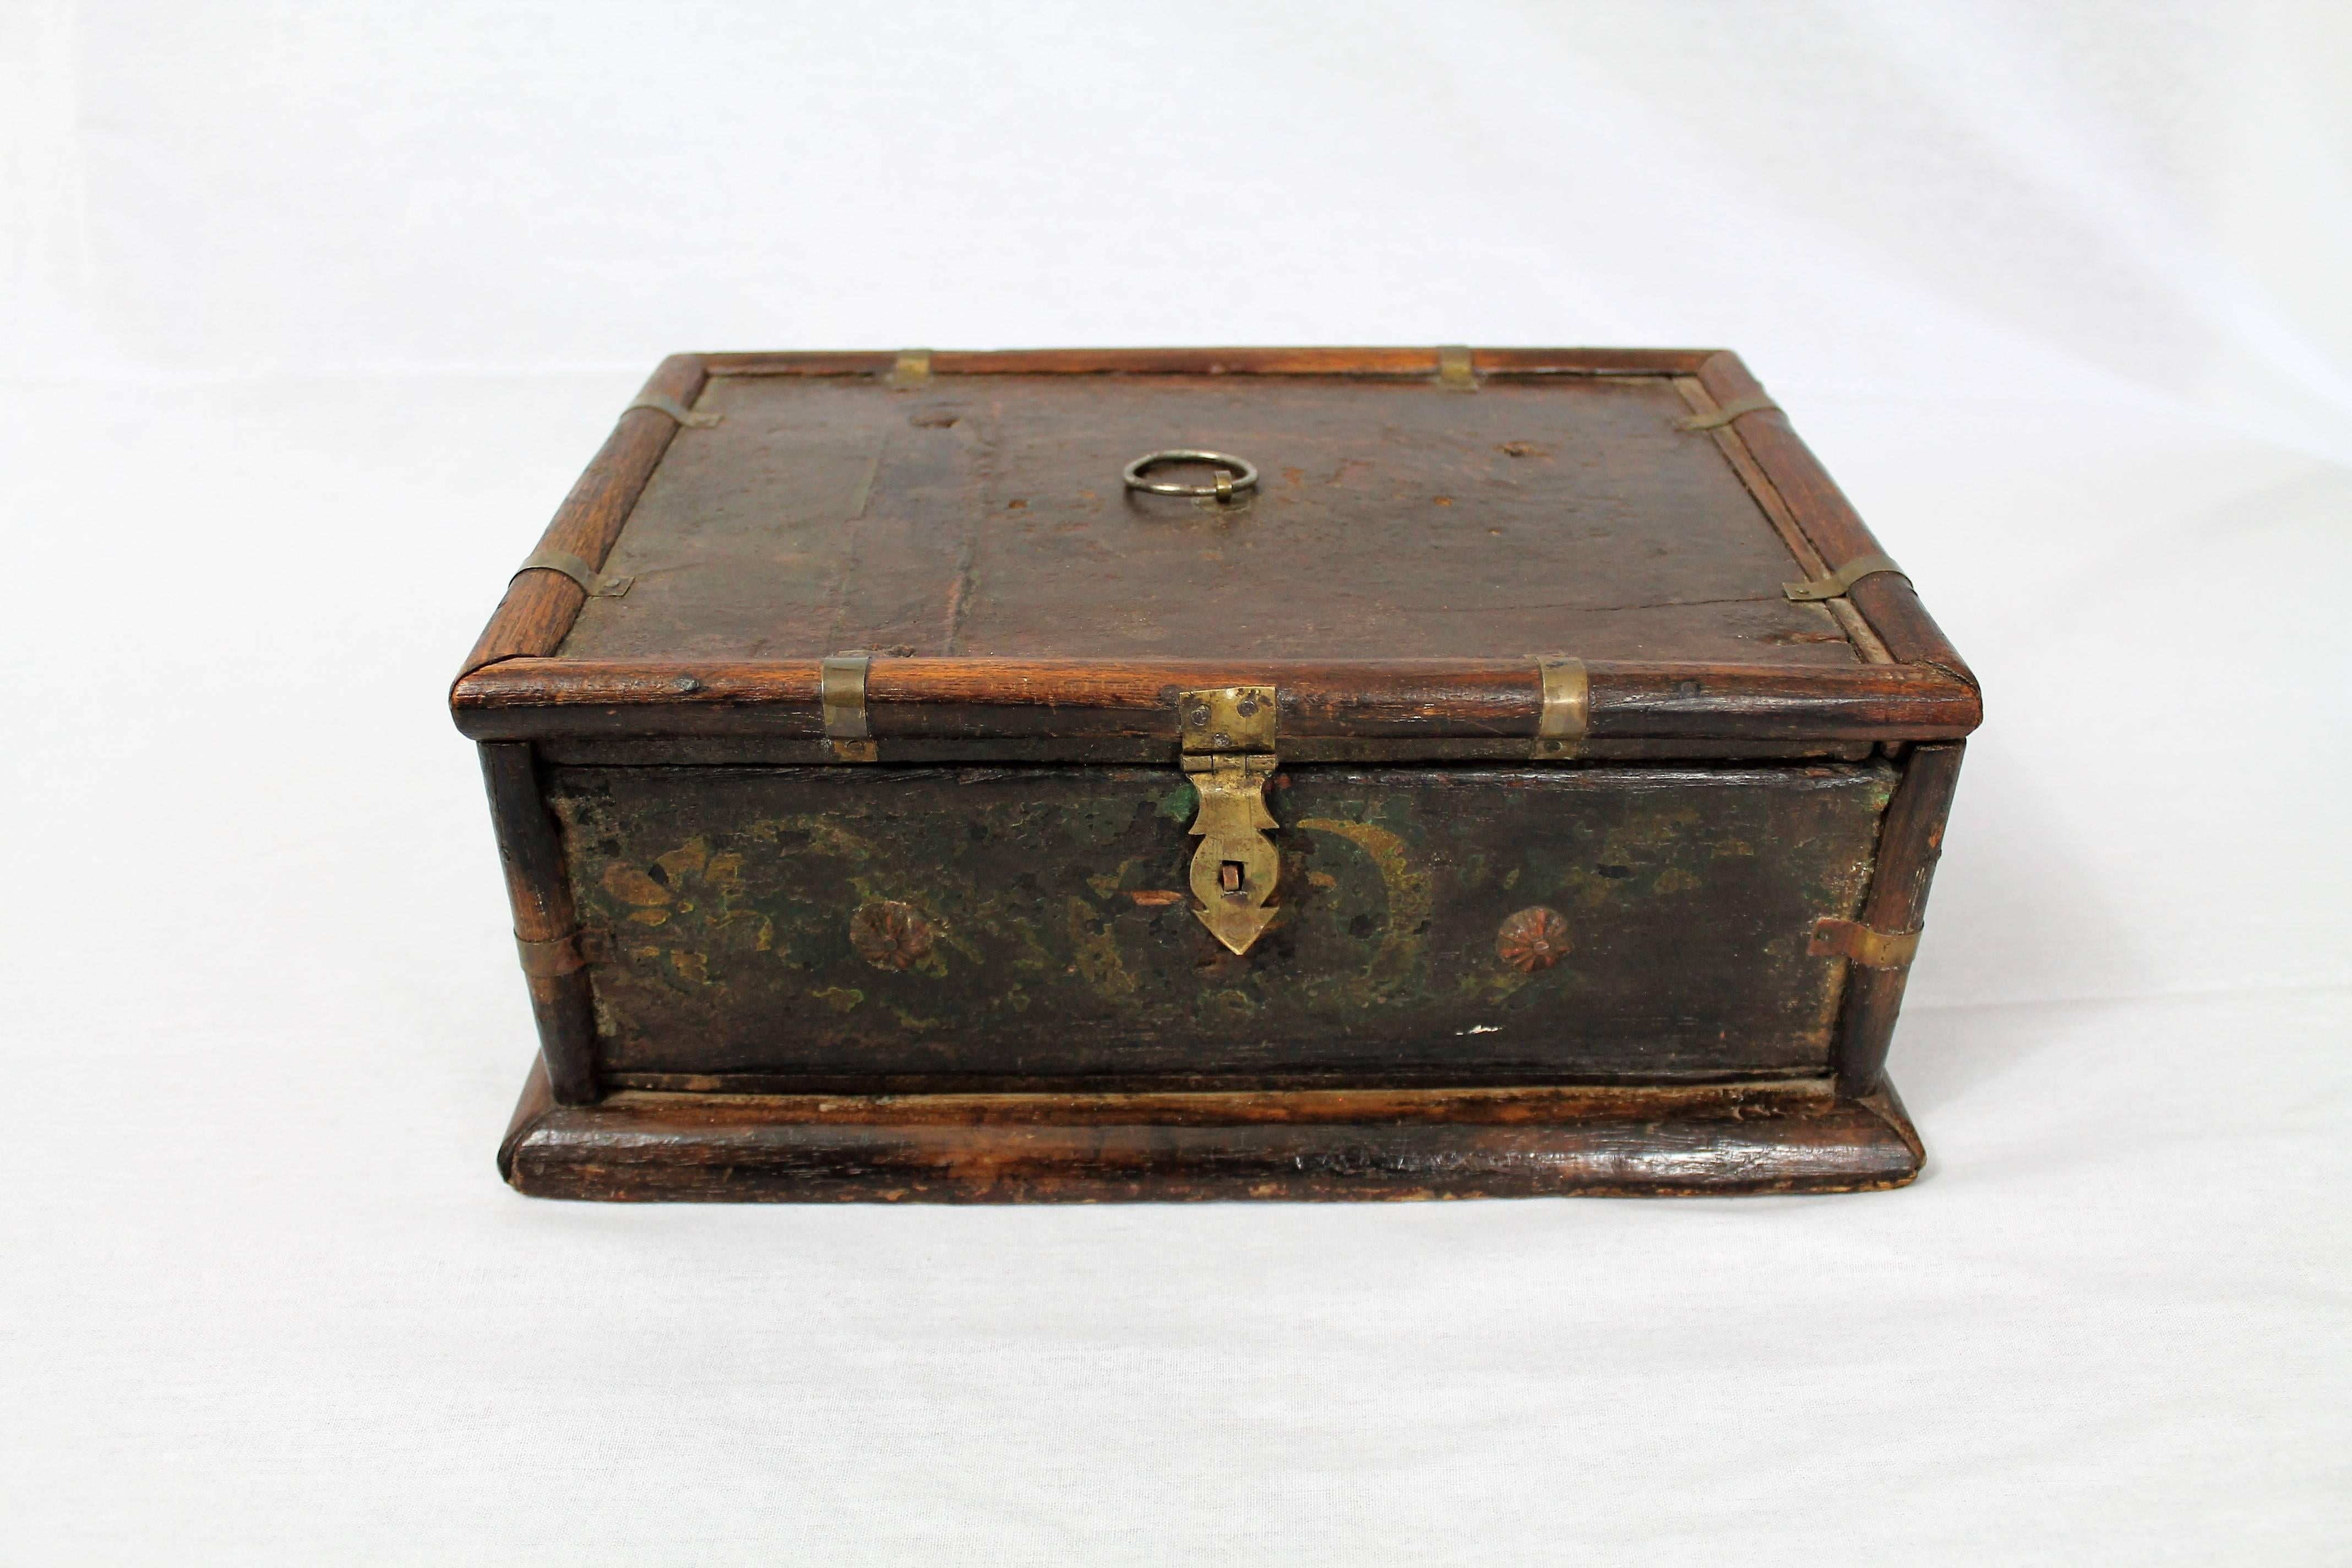 This box made of fruitwood, with traces of green and yellow polychromies probably belonged to a painter since it was probably used to preserve pigments for the realization of paintings, so the interior is divided into several compartments to store